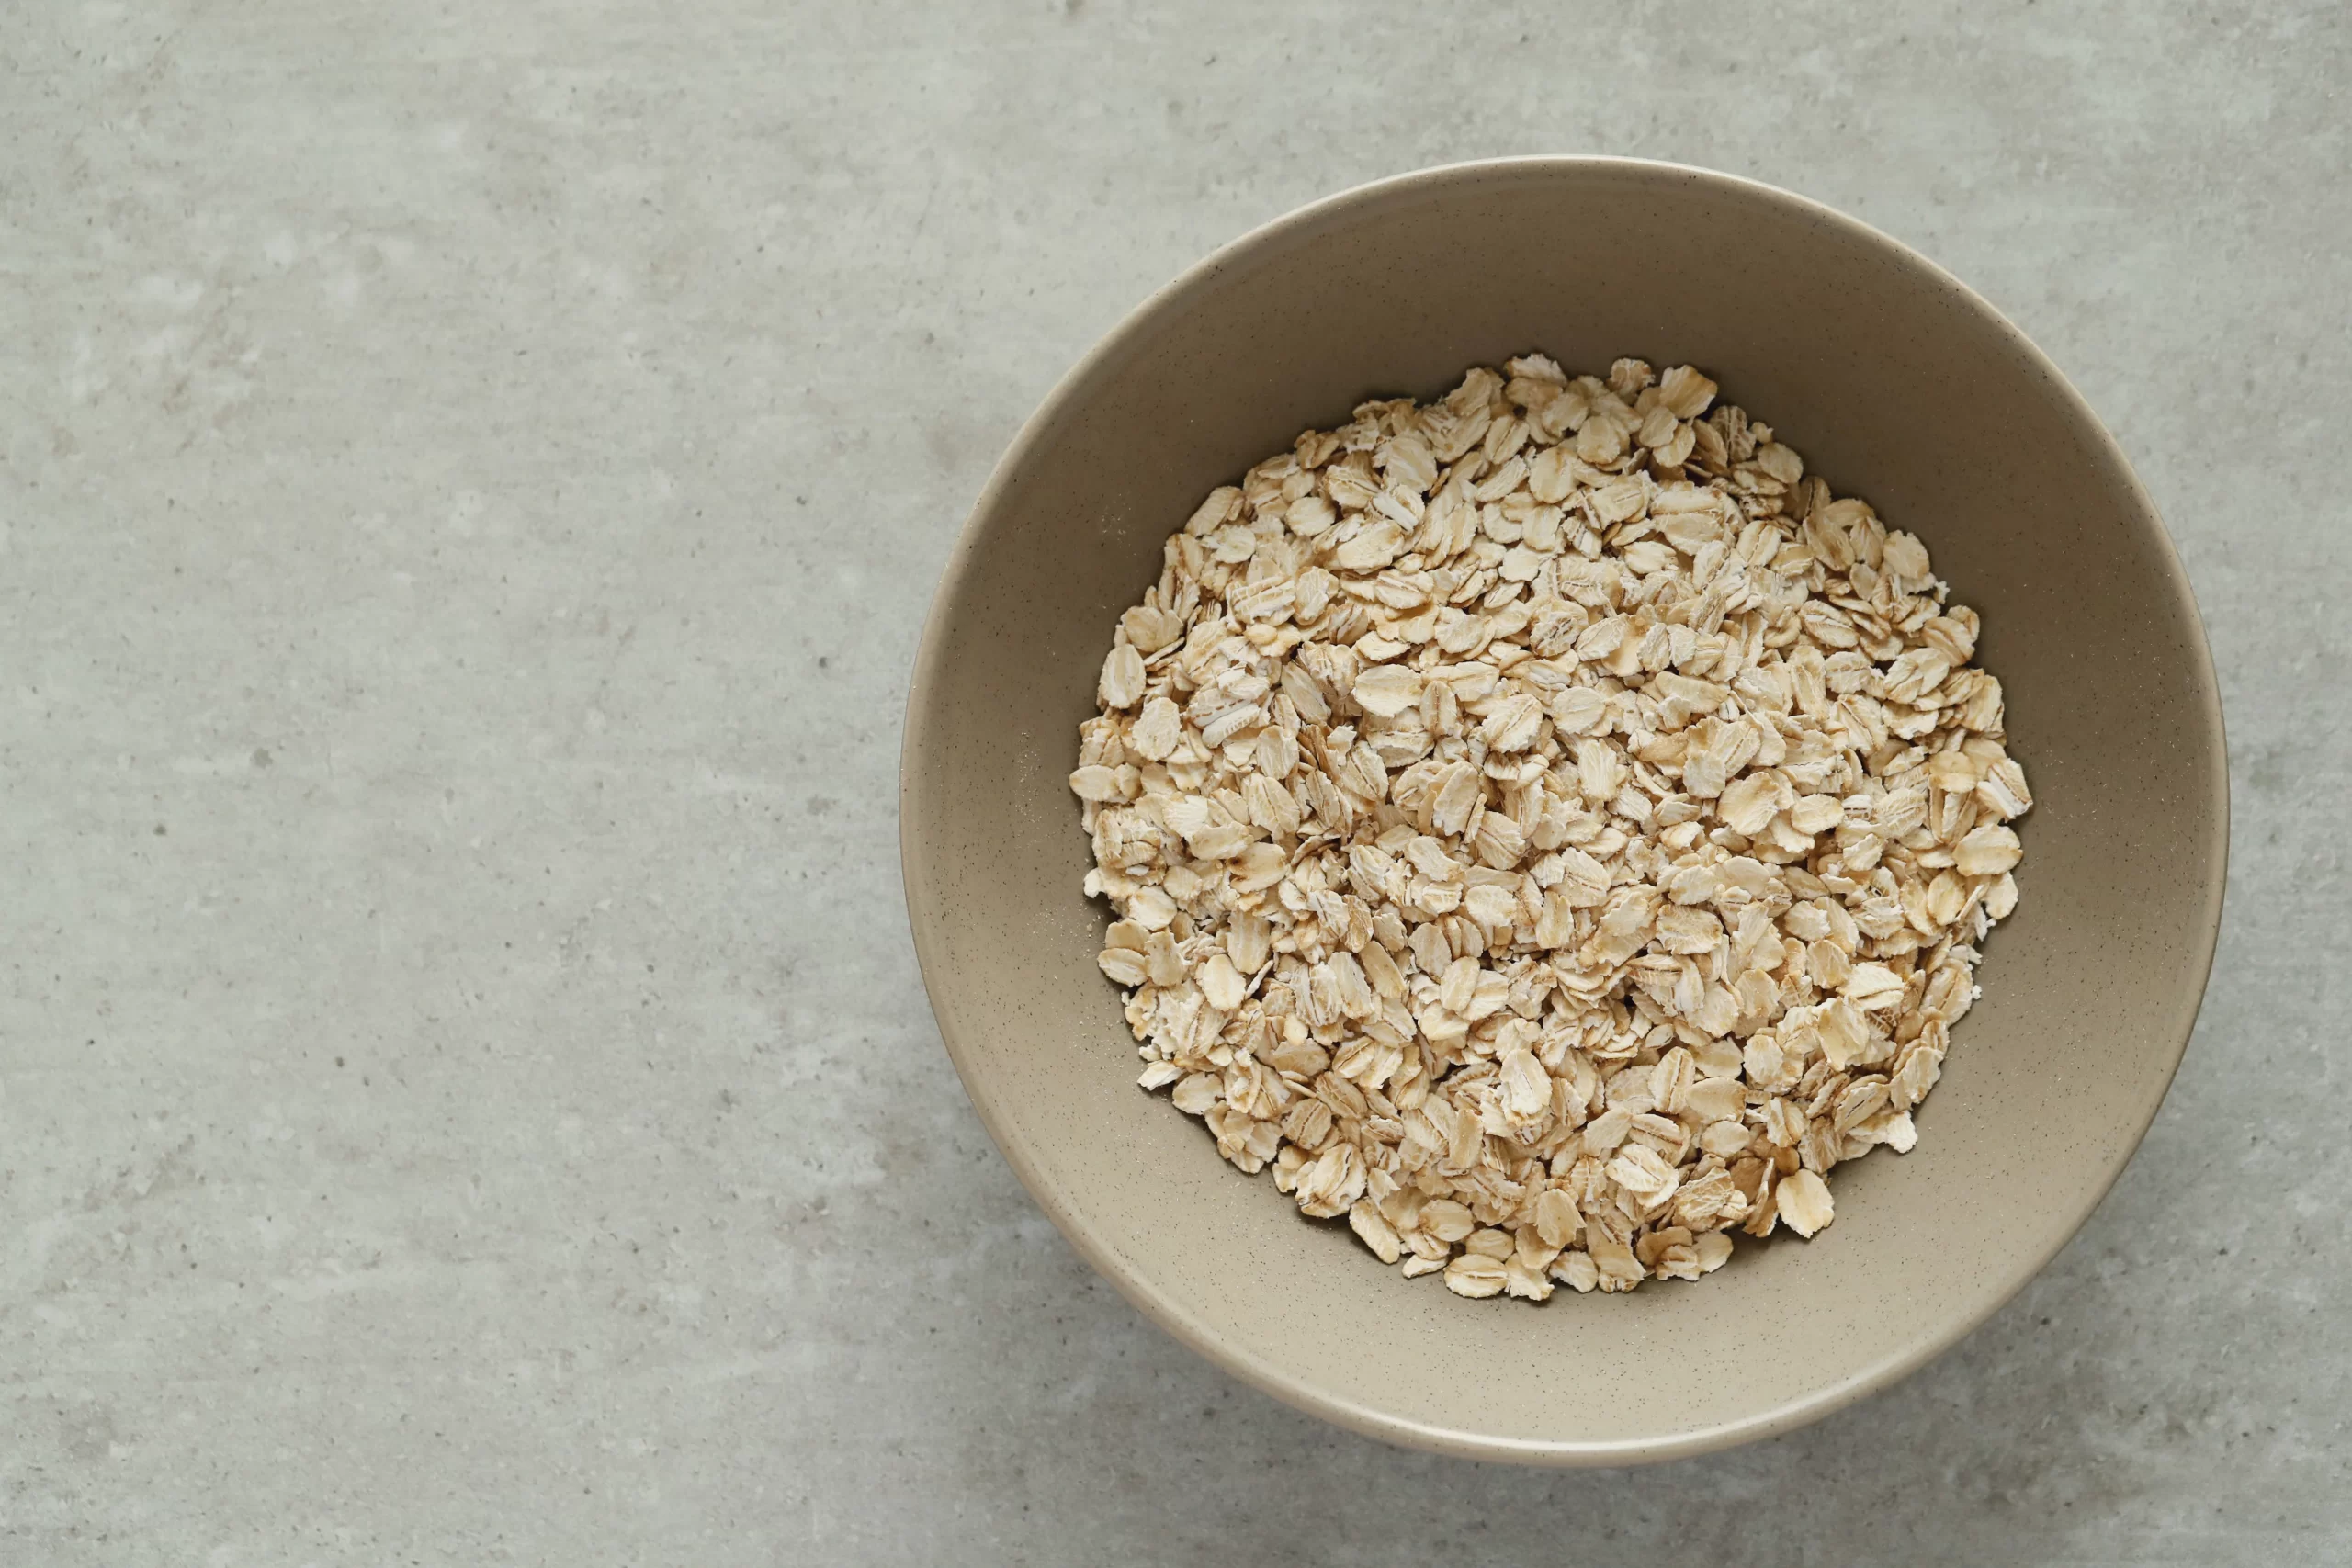 Emergency food storage is important, especially when considering the unpredictable nature of supply chains. Oats in a bowl on a concrete surface are a practical option to have for long-term sustenance.